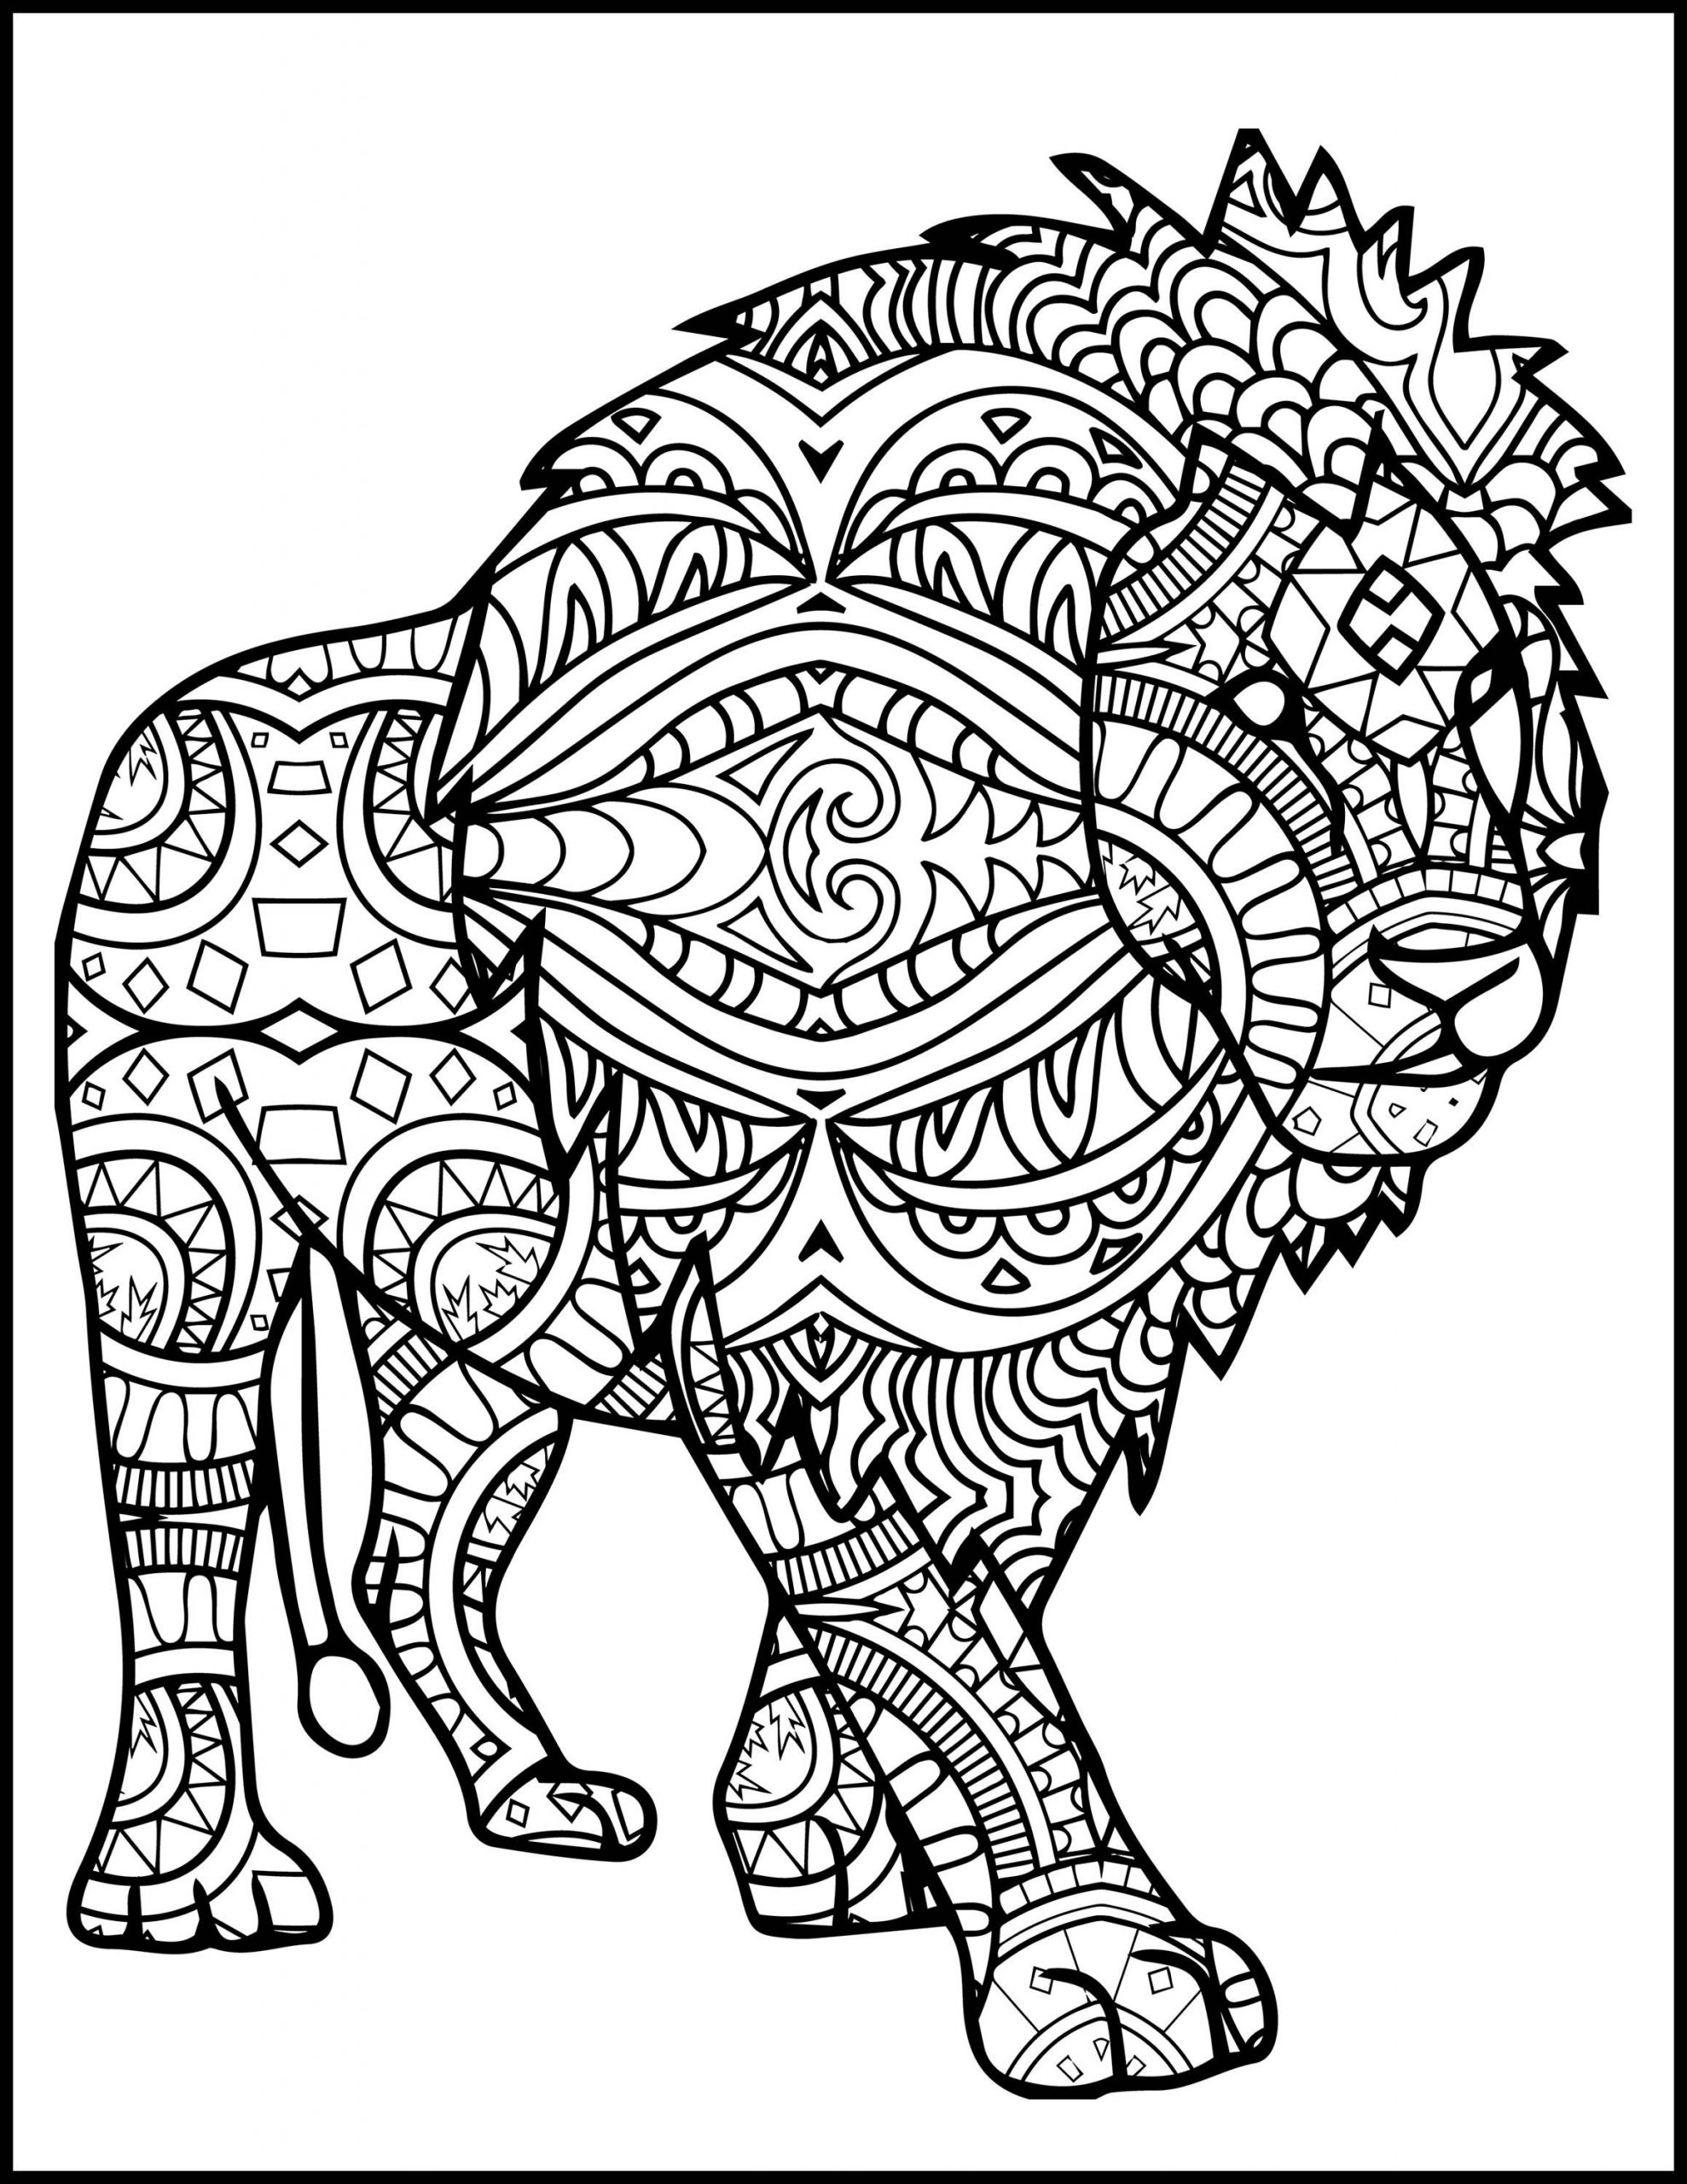 Lion Coloring Pages For Adults
 3 Printable Pages for Coloring for Lion Lovers Coloring